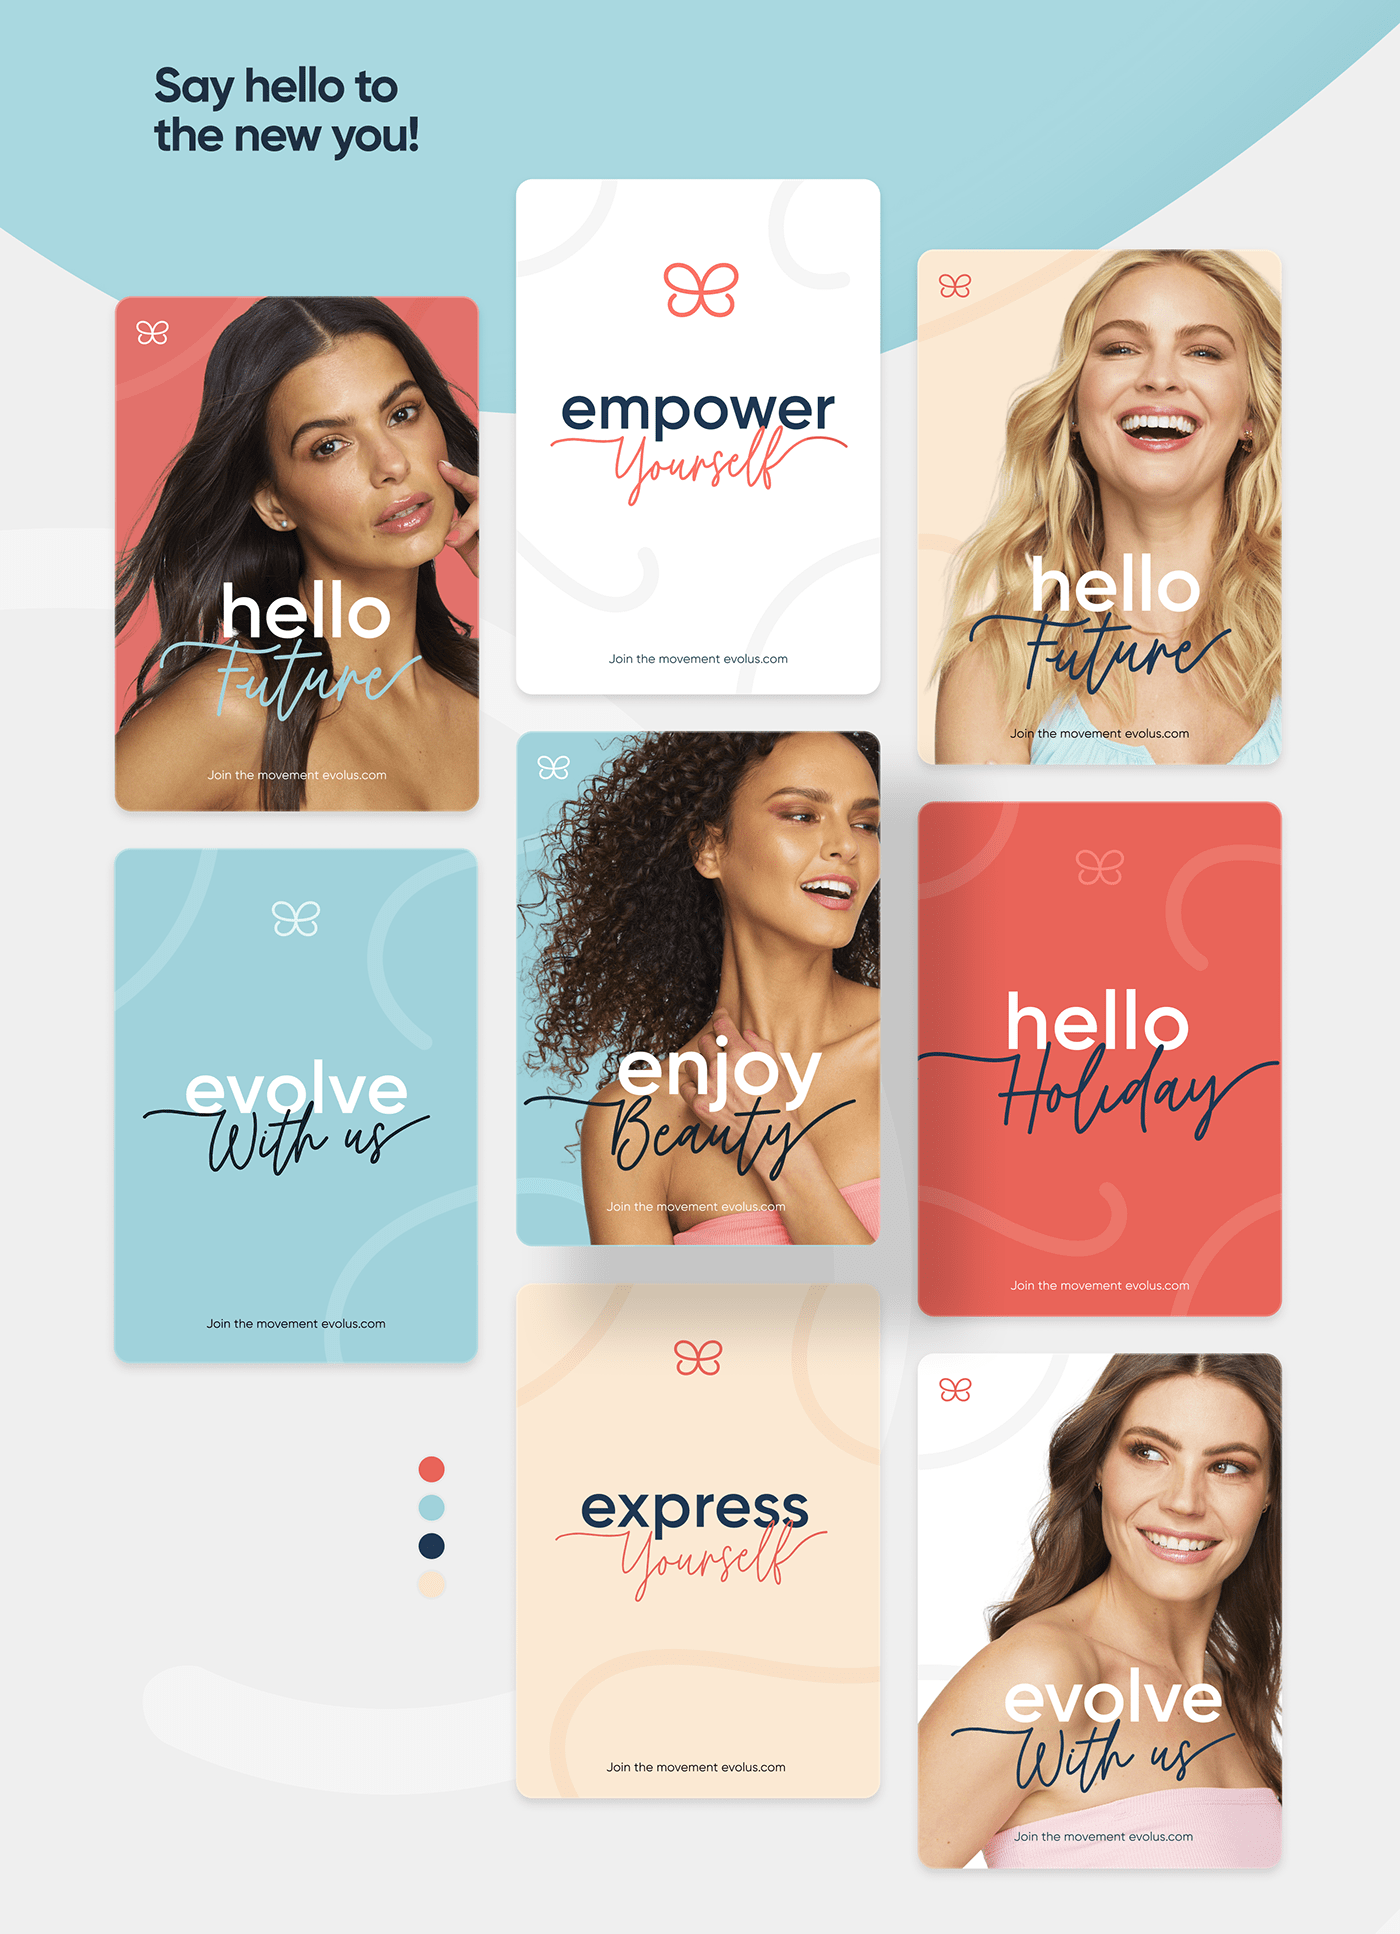 Evolus digital membership cards, featuring contrasting typefaces, symbol, and derived motifs.